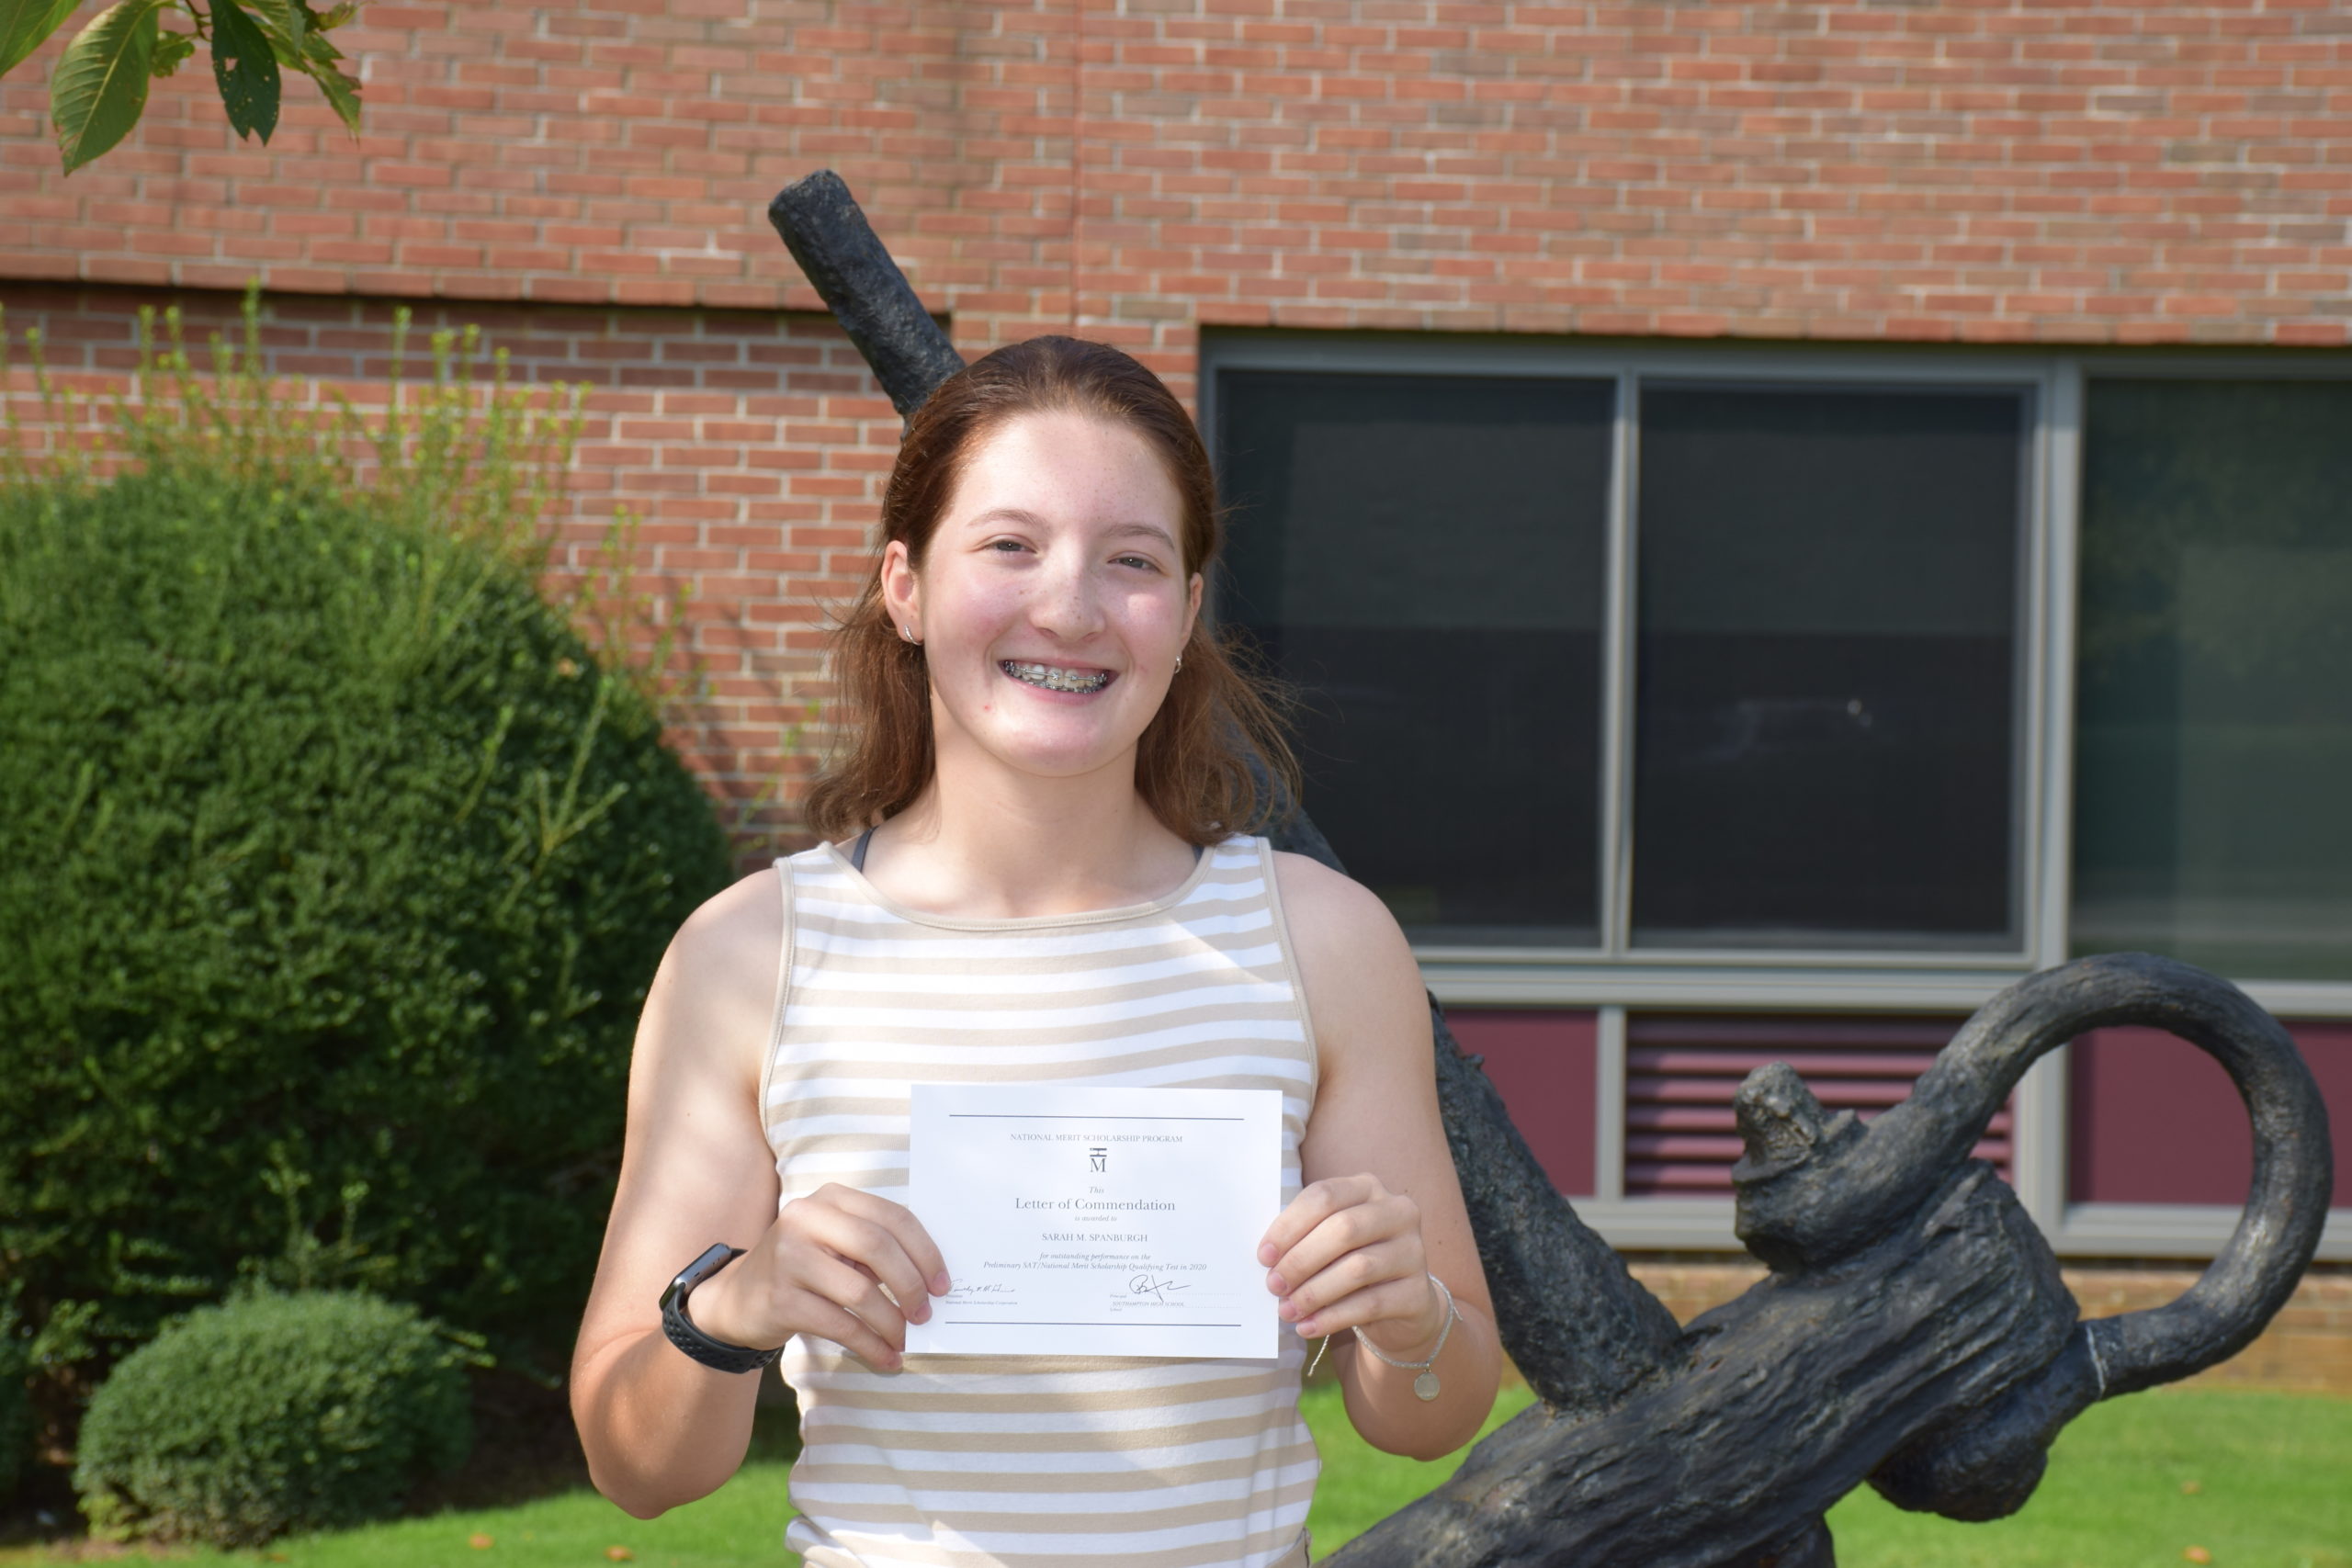 Southampton High School senior Sarah Spanburg has been named a National Merit Commended Student.